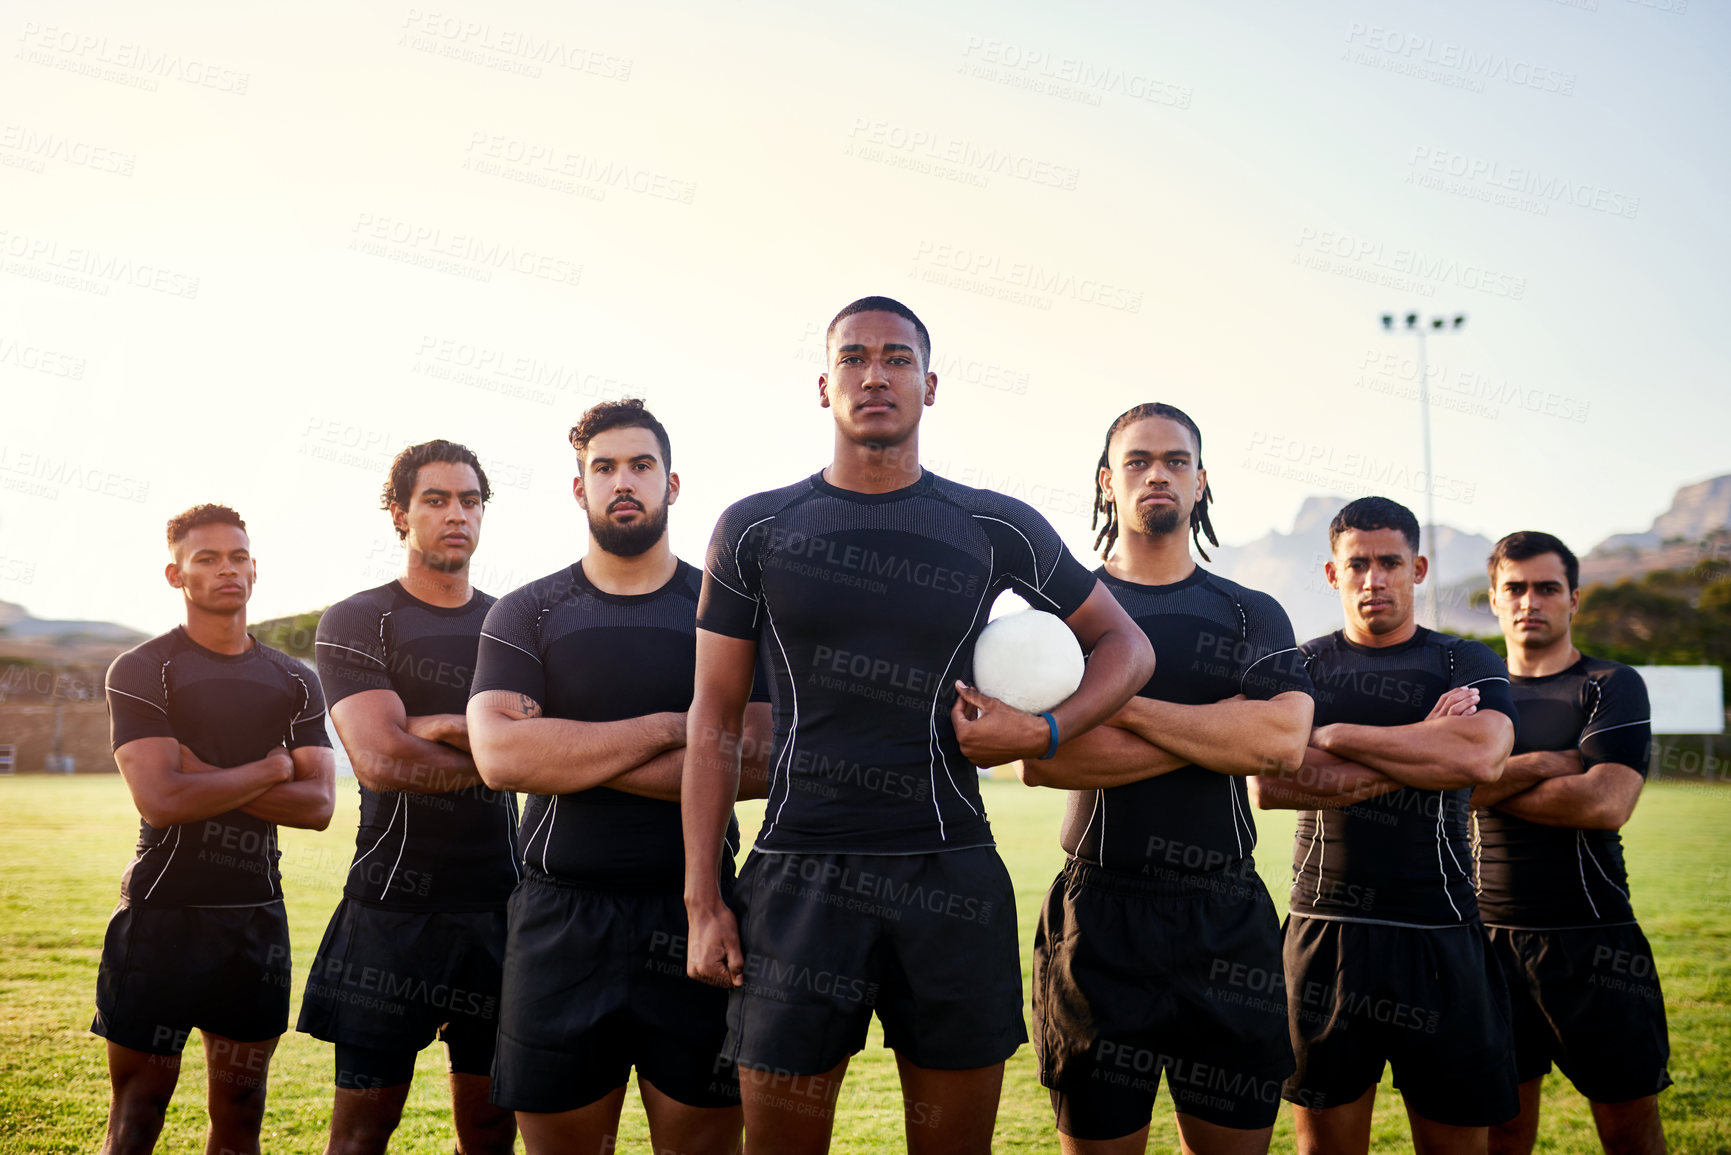 Buy stock photo Cropped portrait of a diverse group of sportsmen standing together before playing rugby during the day